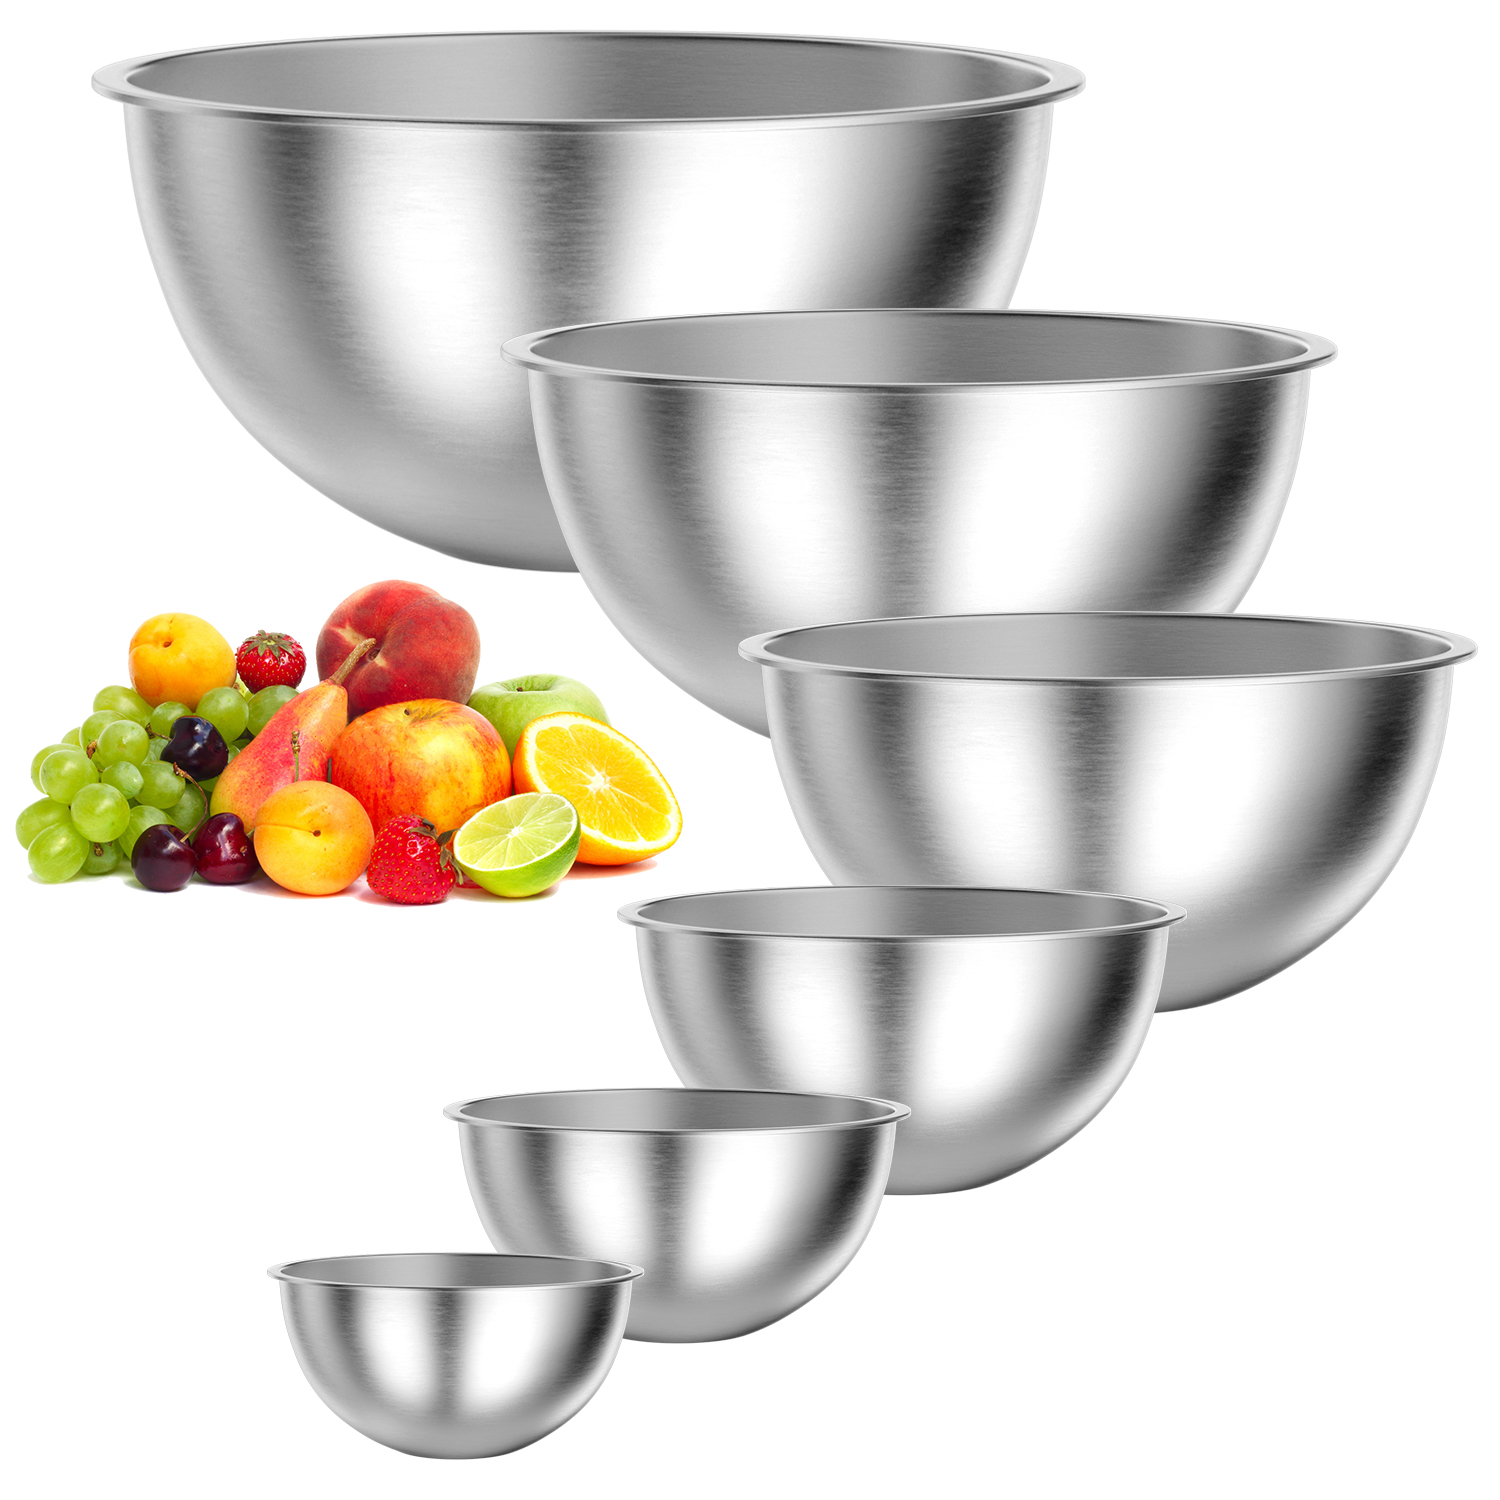 TINANA Mixing Bowls Set, Stainless Steel Mixing Bowls, 6 PCS Metal Nesting Storage Bowls for Kitchen, Size 8, 5, 4, 3, 1.5, 0.75 QT, Great for Prep, Baking, Serving - image 1 of 7